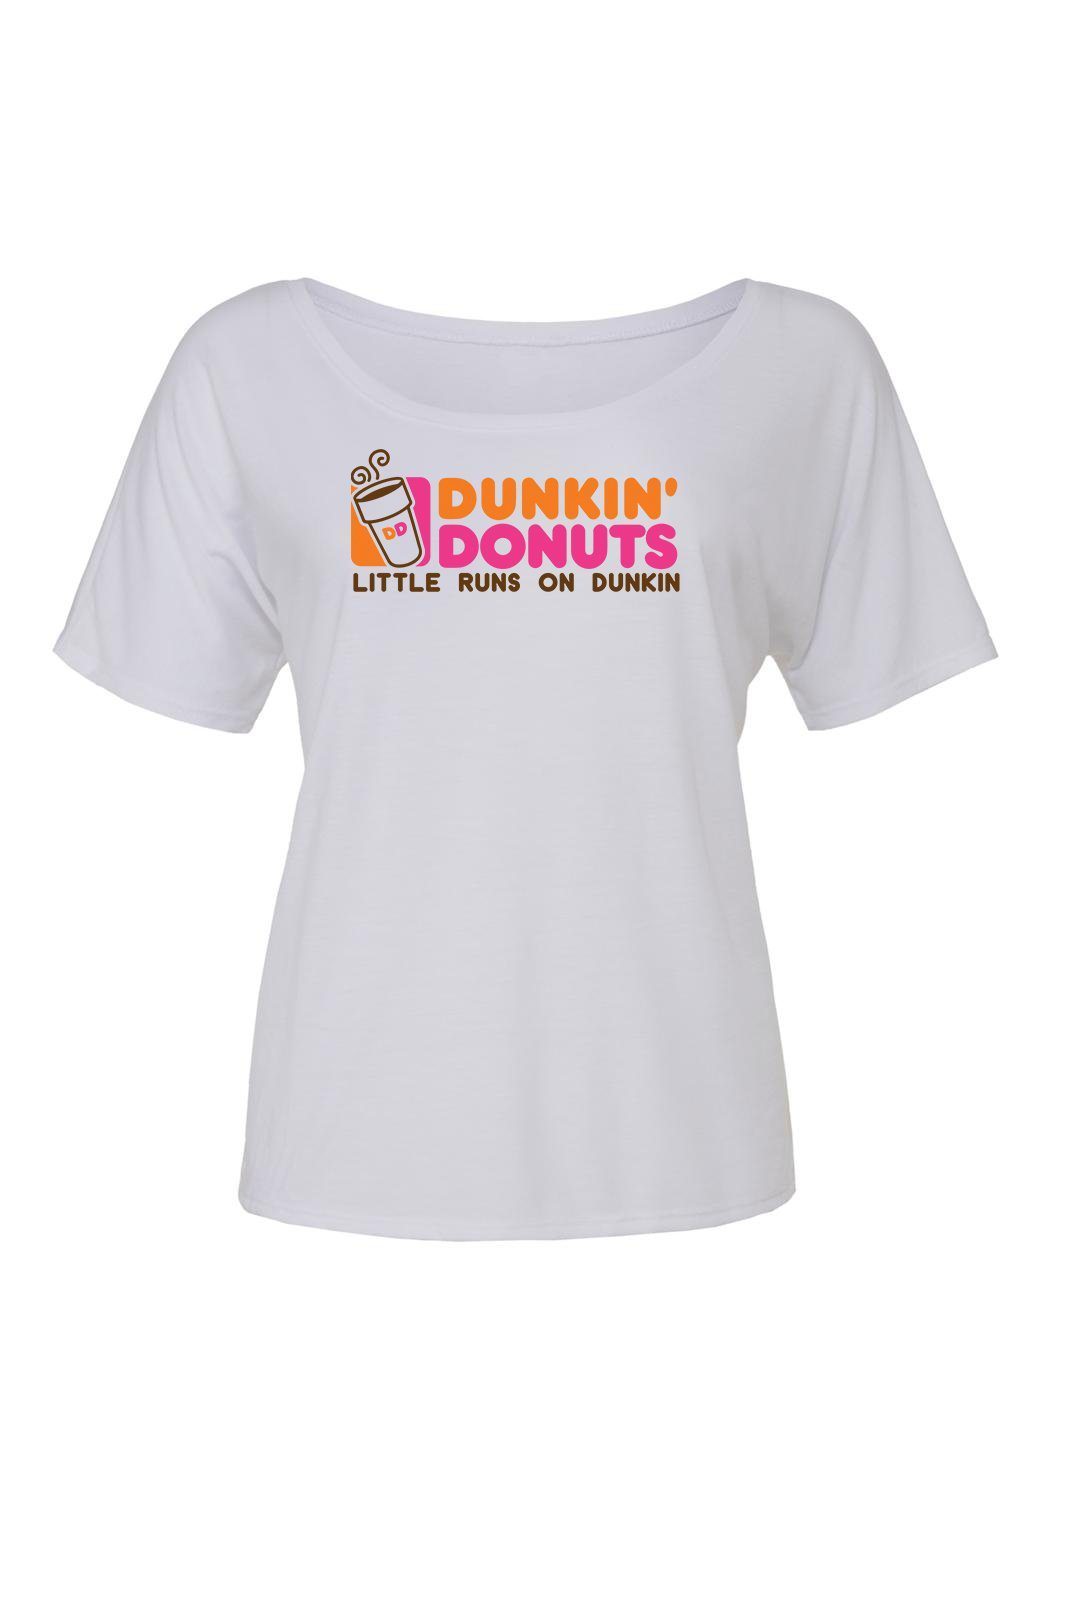 Big Little Runs on Dunkin Shirt - Bella Slouchy Scoop Neck Short Sleeve, Ladies, Sunny and Southern, - Sunny and Southern,